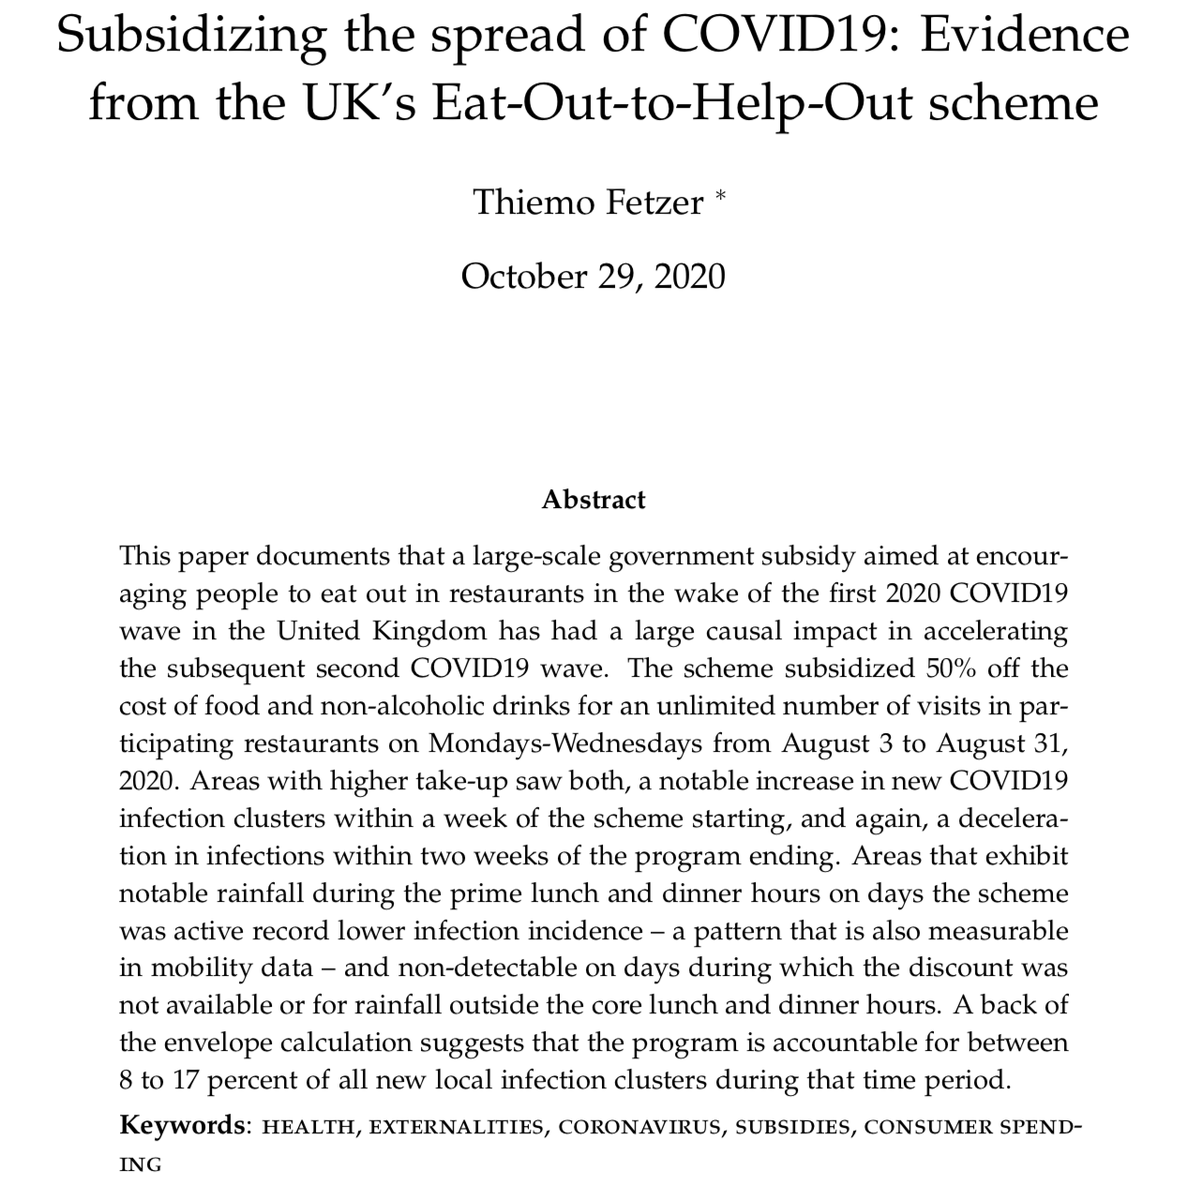 Today I m sharing another paper on unintended consequences of a UK policy which makes me cringe at how my tax money is spent all the while debating  #FreeSchoolMeals "Subsidizing the spread of COVID-19: Evidence from the UK’s  #EOHO scheme".   https://bit.ly/3ed5Slo  a thread